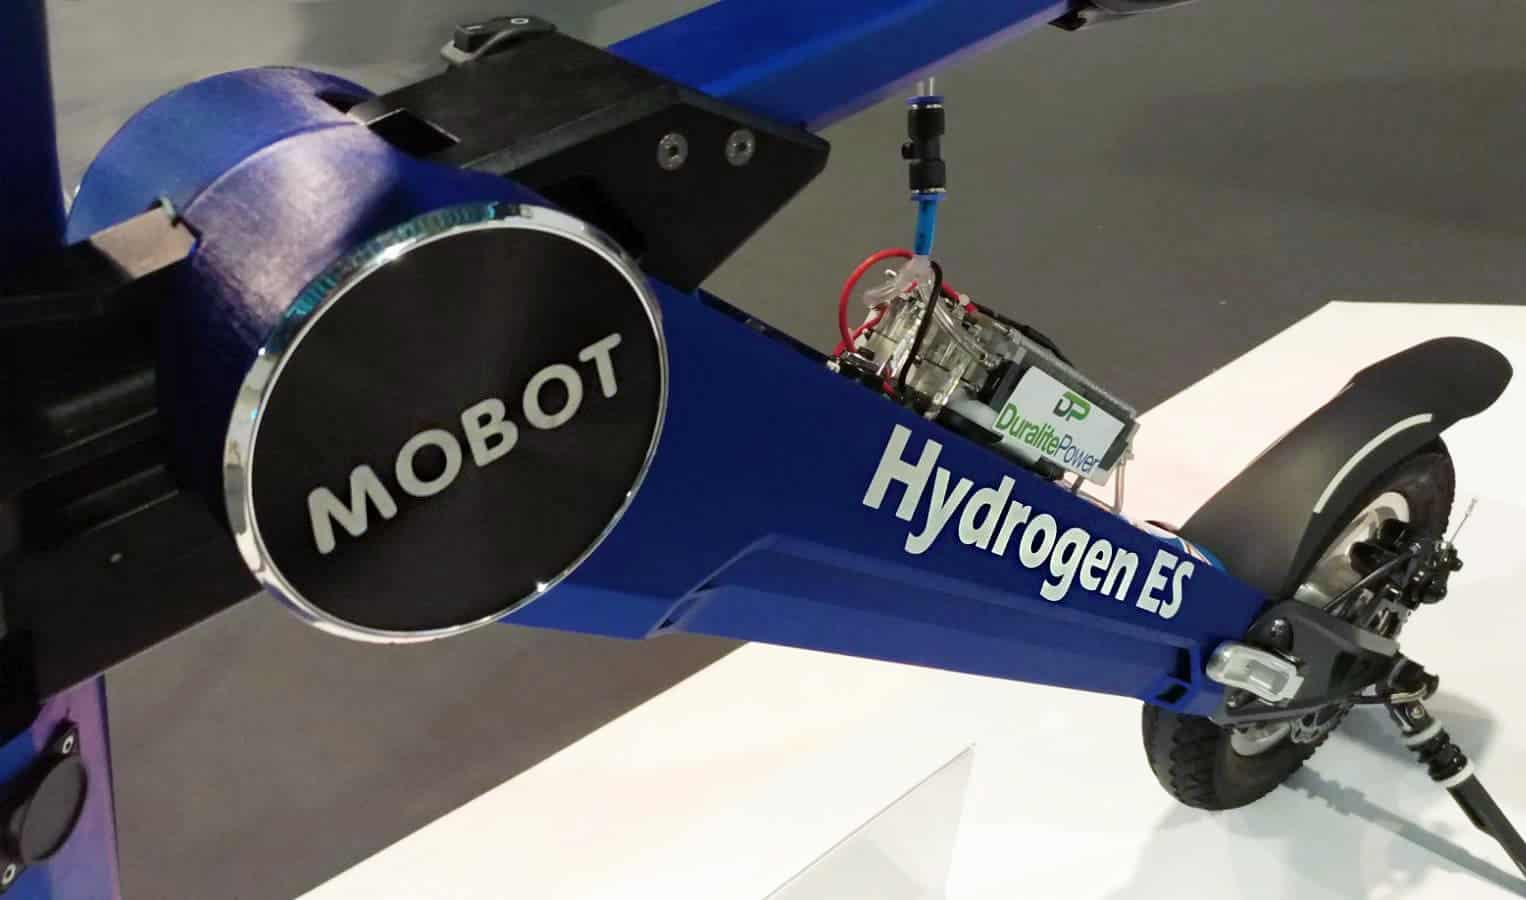 HydrogenES - Hydrogen Powered Electric Scooters - The Future of PMDs?